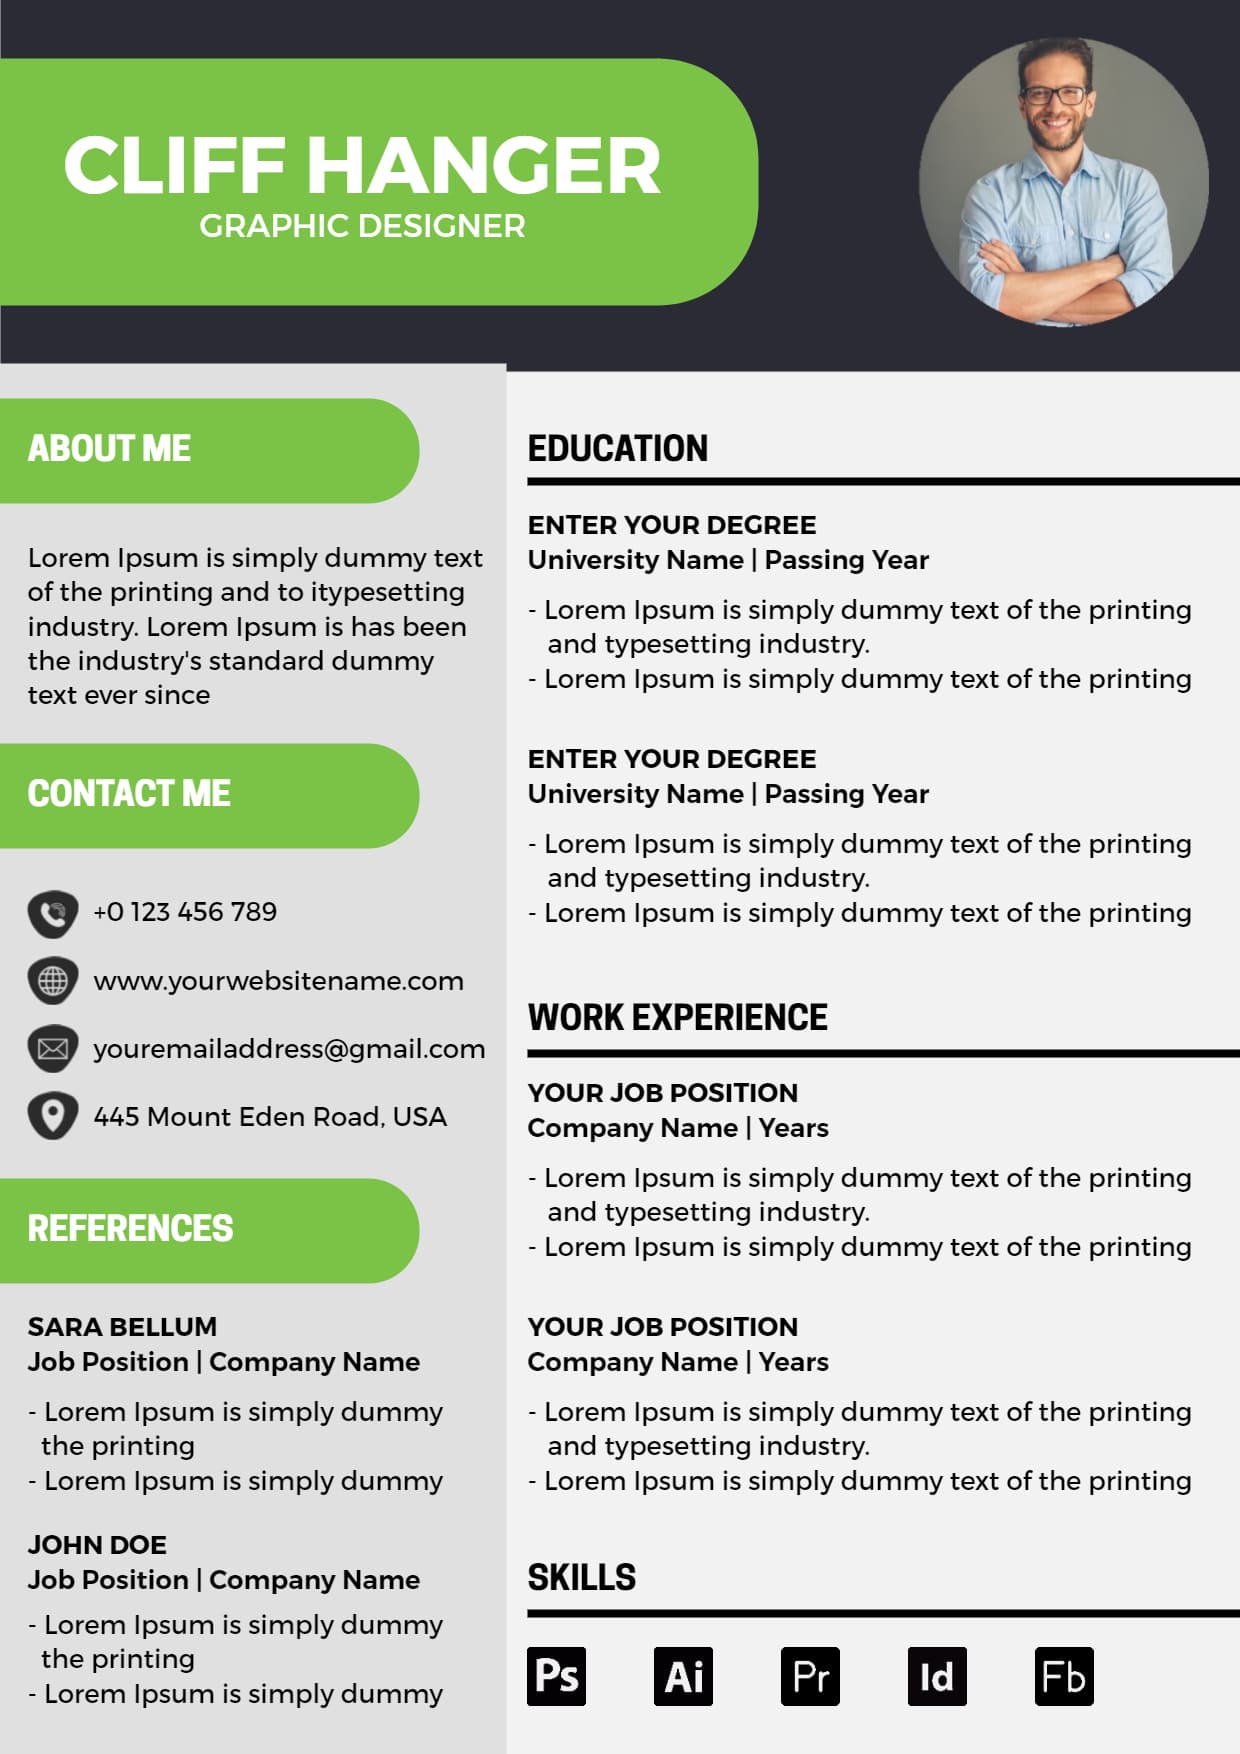 Typography-Driven Graphic Designer Resume template example